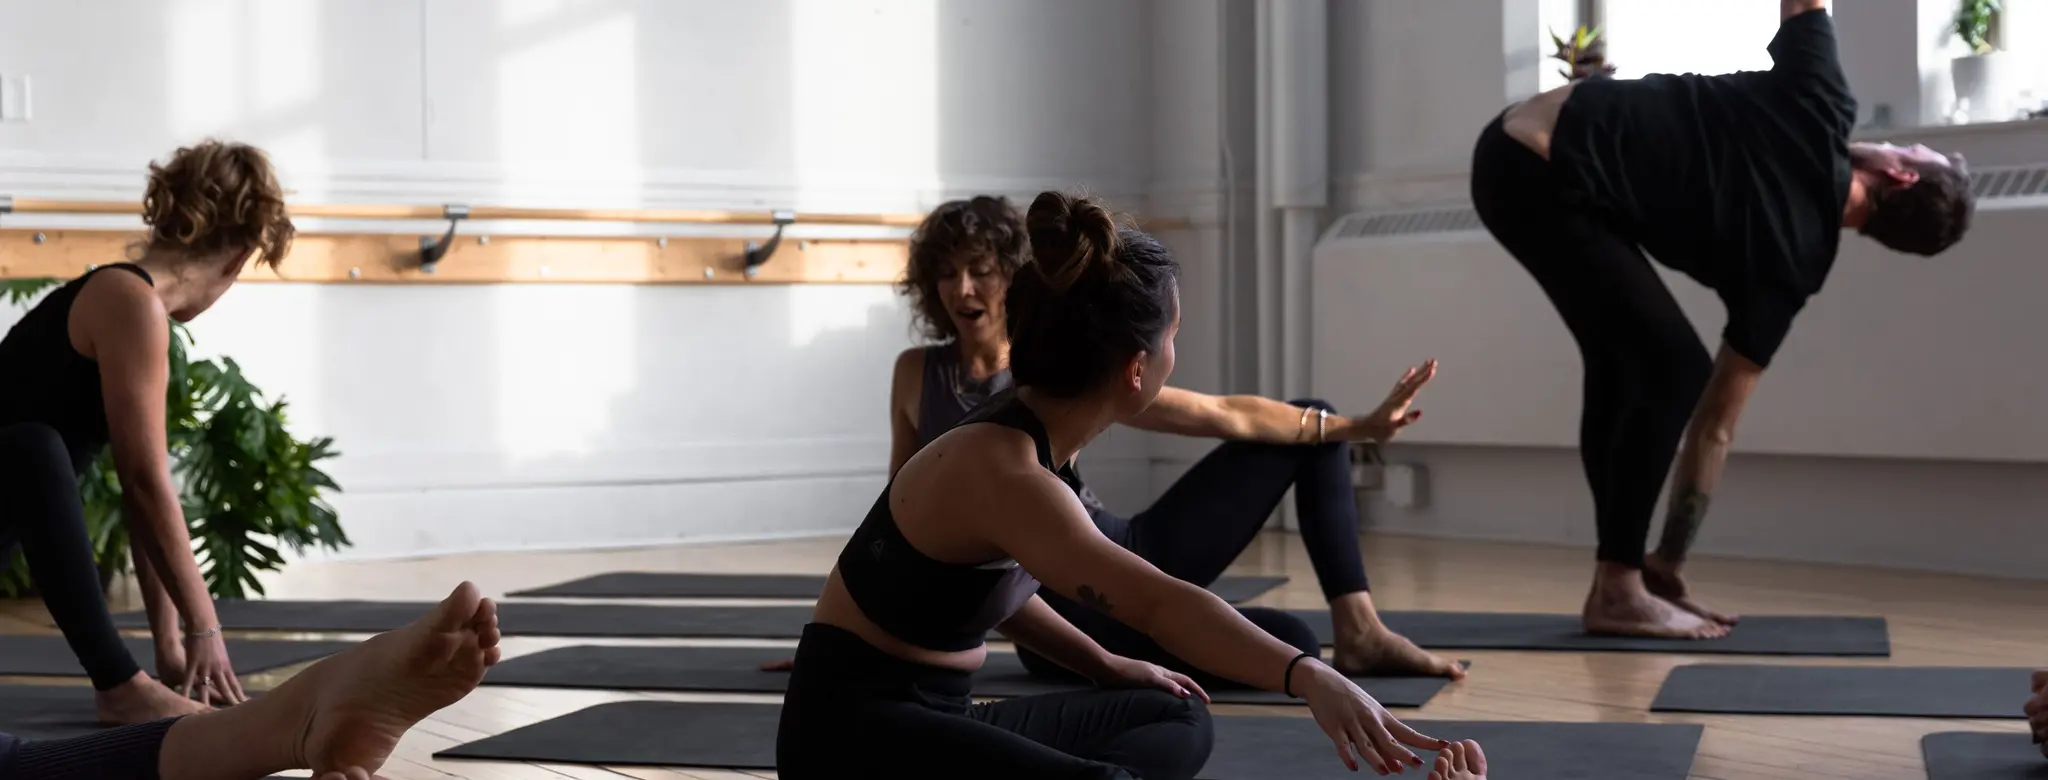 Yoga students stretch in a sunny studio before class